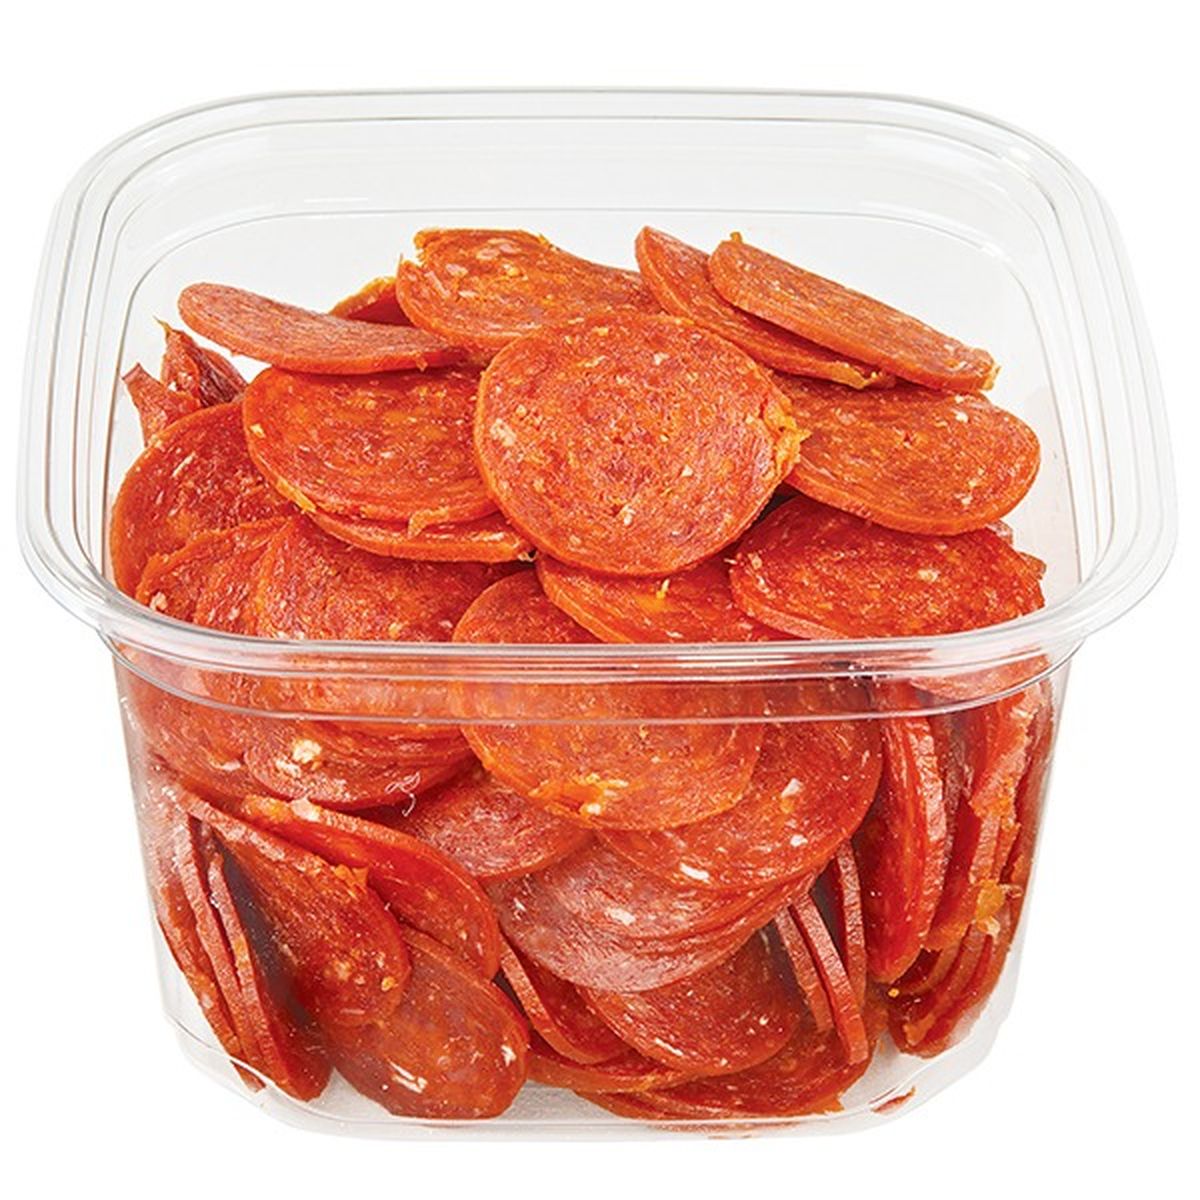 Calories in Wegmans Spicy Small Cup Pepperoni, Pizza Topping